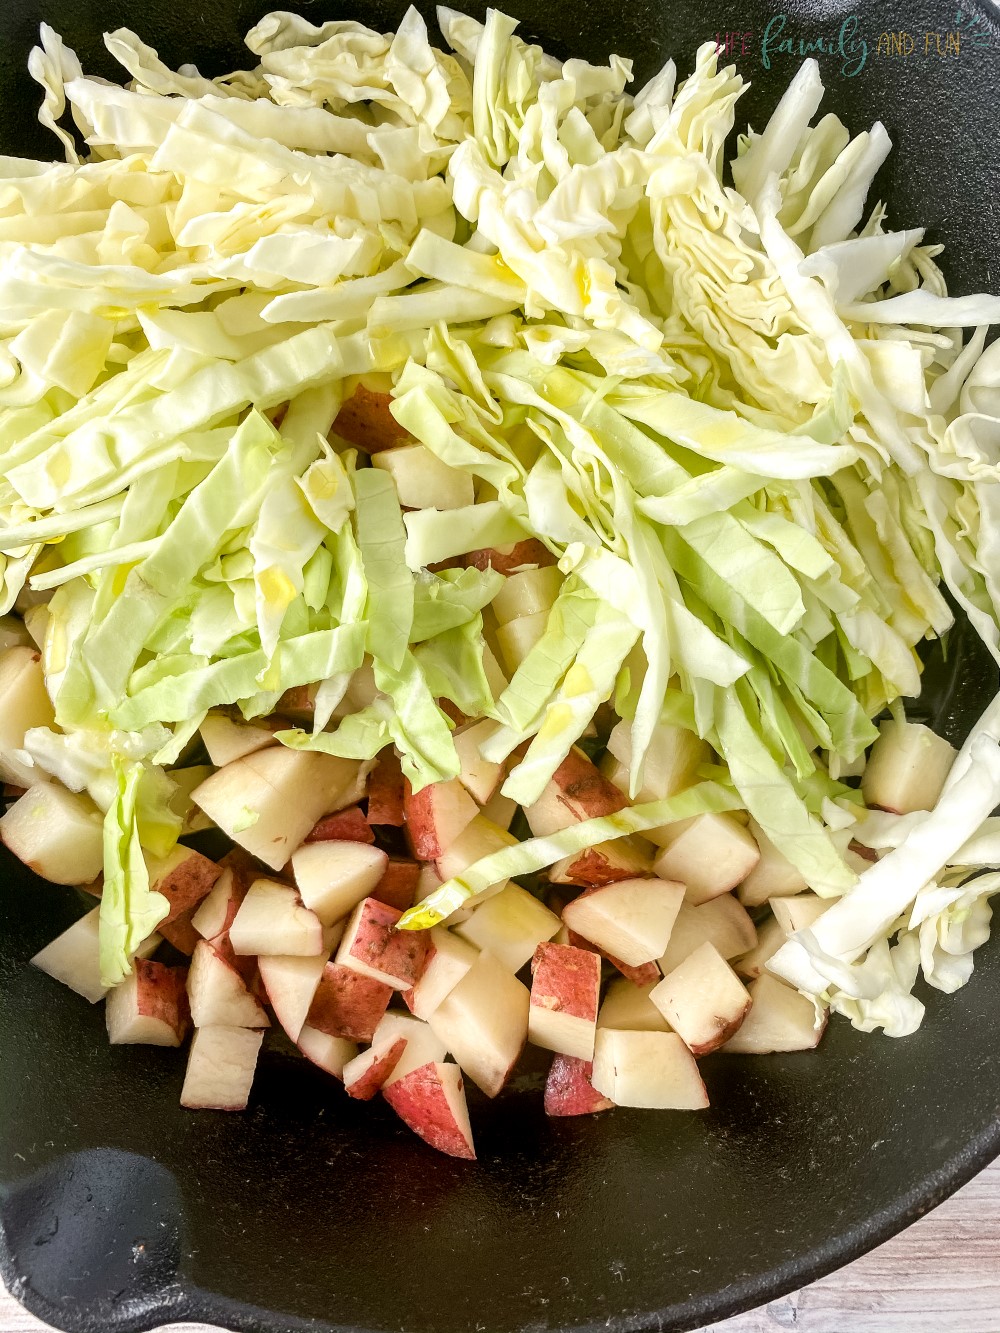 shredded cabbage and diced potatoes in skillet